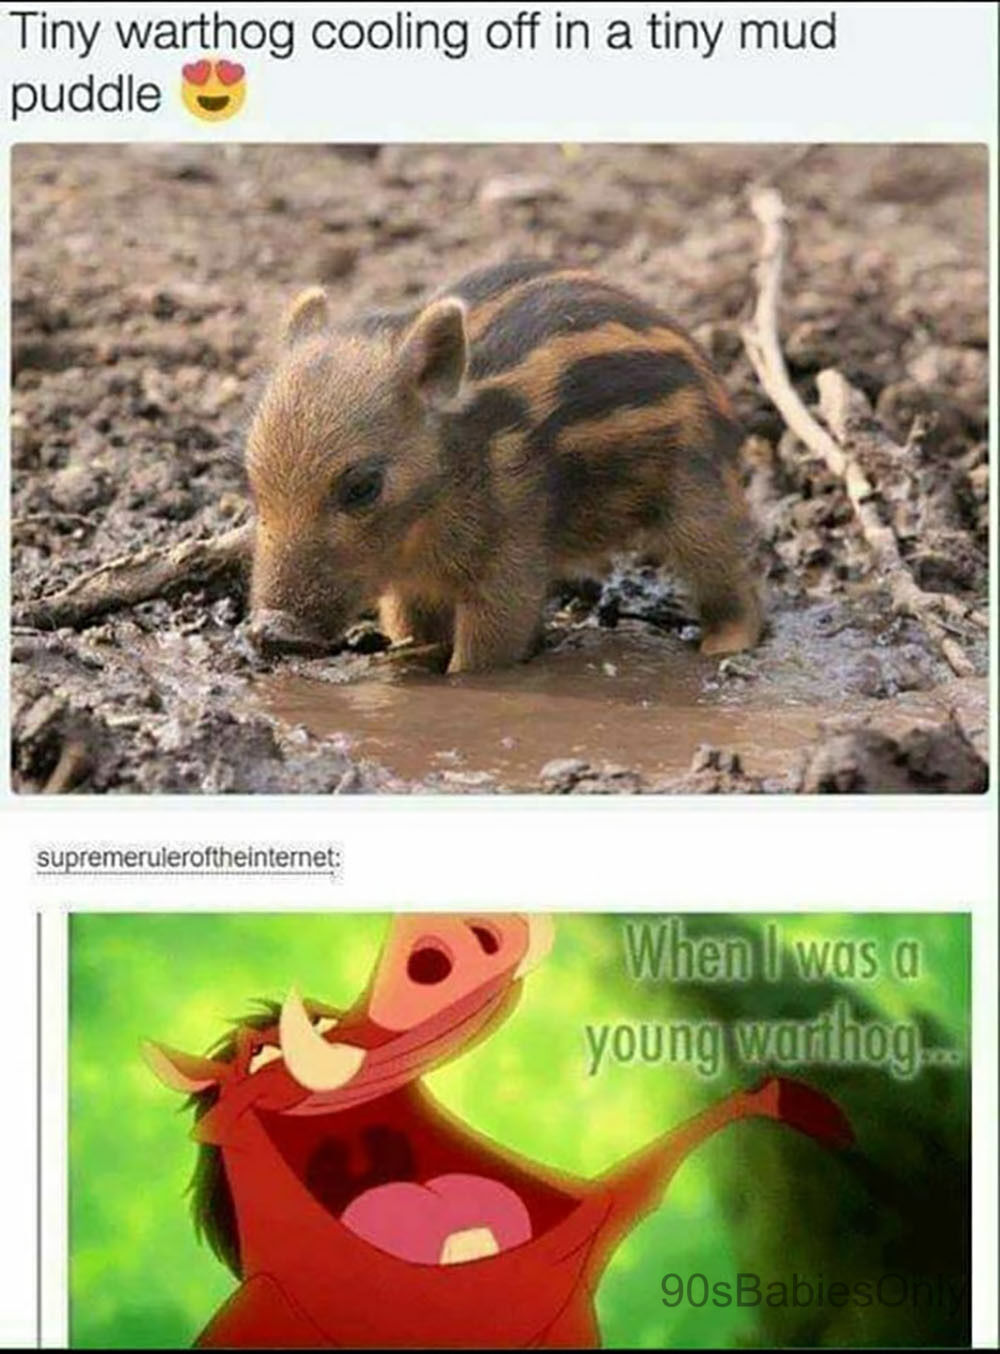 A two-photo collage. The top shows a tiny warthog cooling off in a tiny puddle. The bottom shows Pumbaa from "The Lion King" singing "When I was a young warthog..."